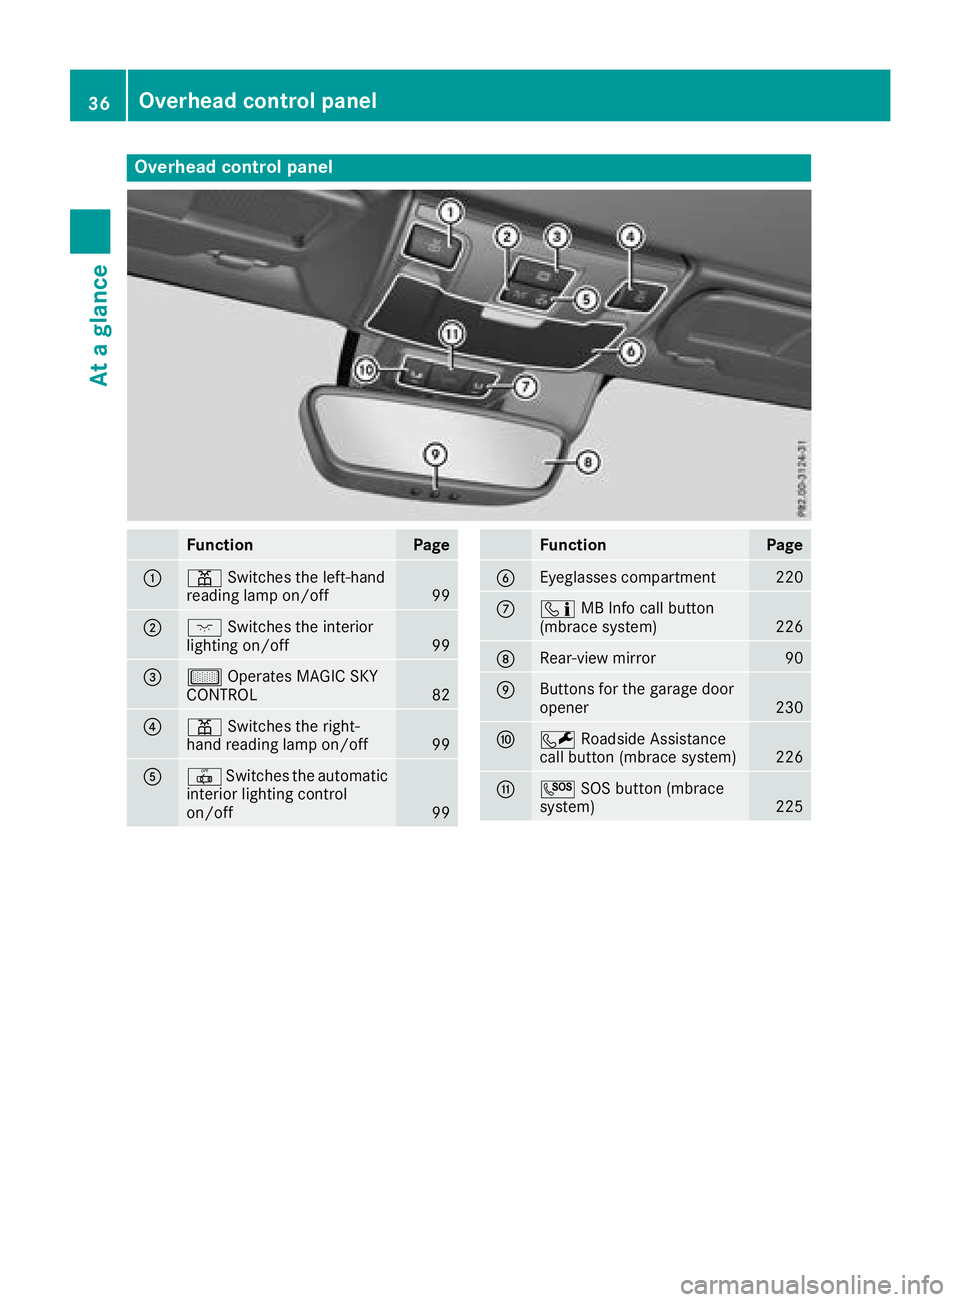 MERCEDES-BENZ SLC ROADSTER 2018  Owners Manual Overheadcontrol panel
FunctionPage
:p Switches the left-hand
reading lamp on/off99
;c Switches the interior
lighting on/off99
=µ Operates MAGIC SKY
CONTROL82
?p Switches the right-
hand reading lamp 